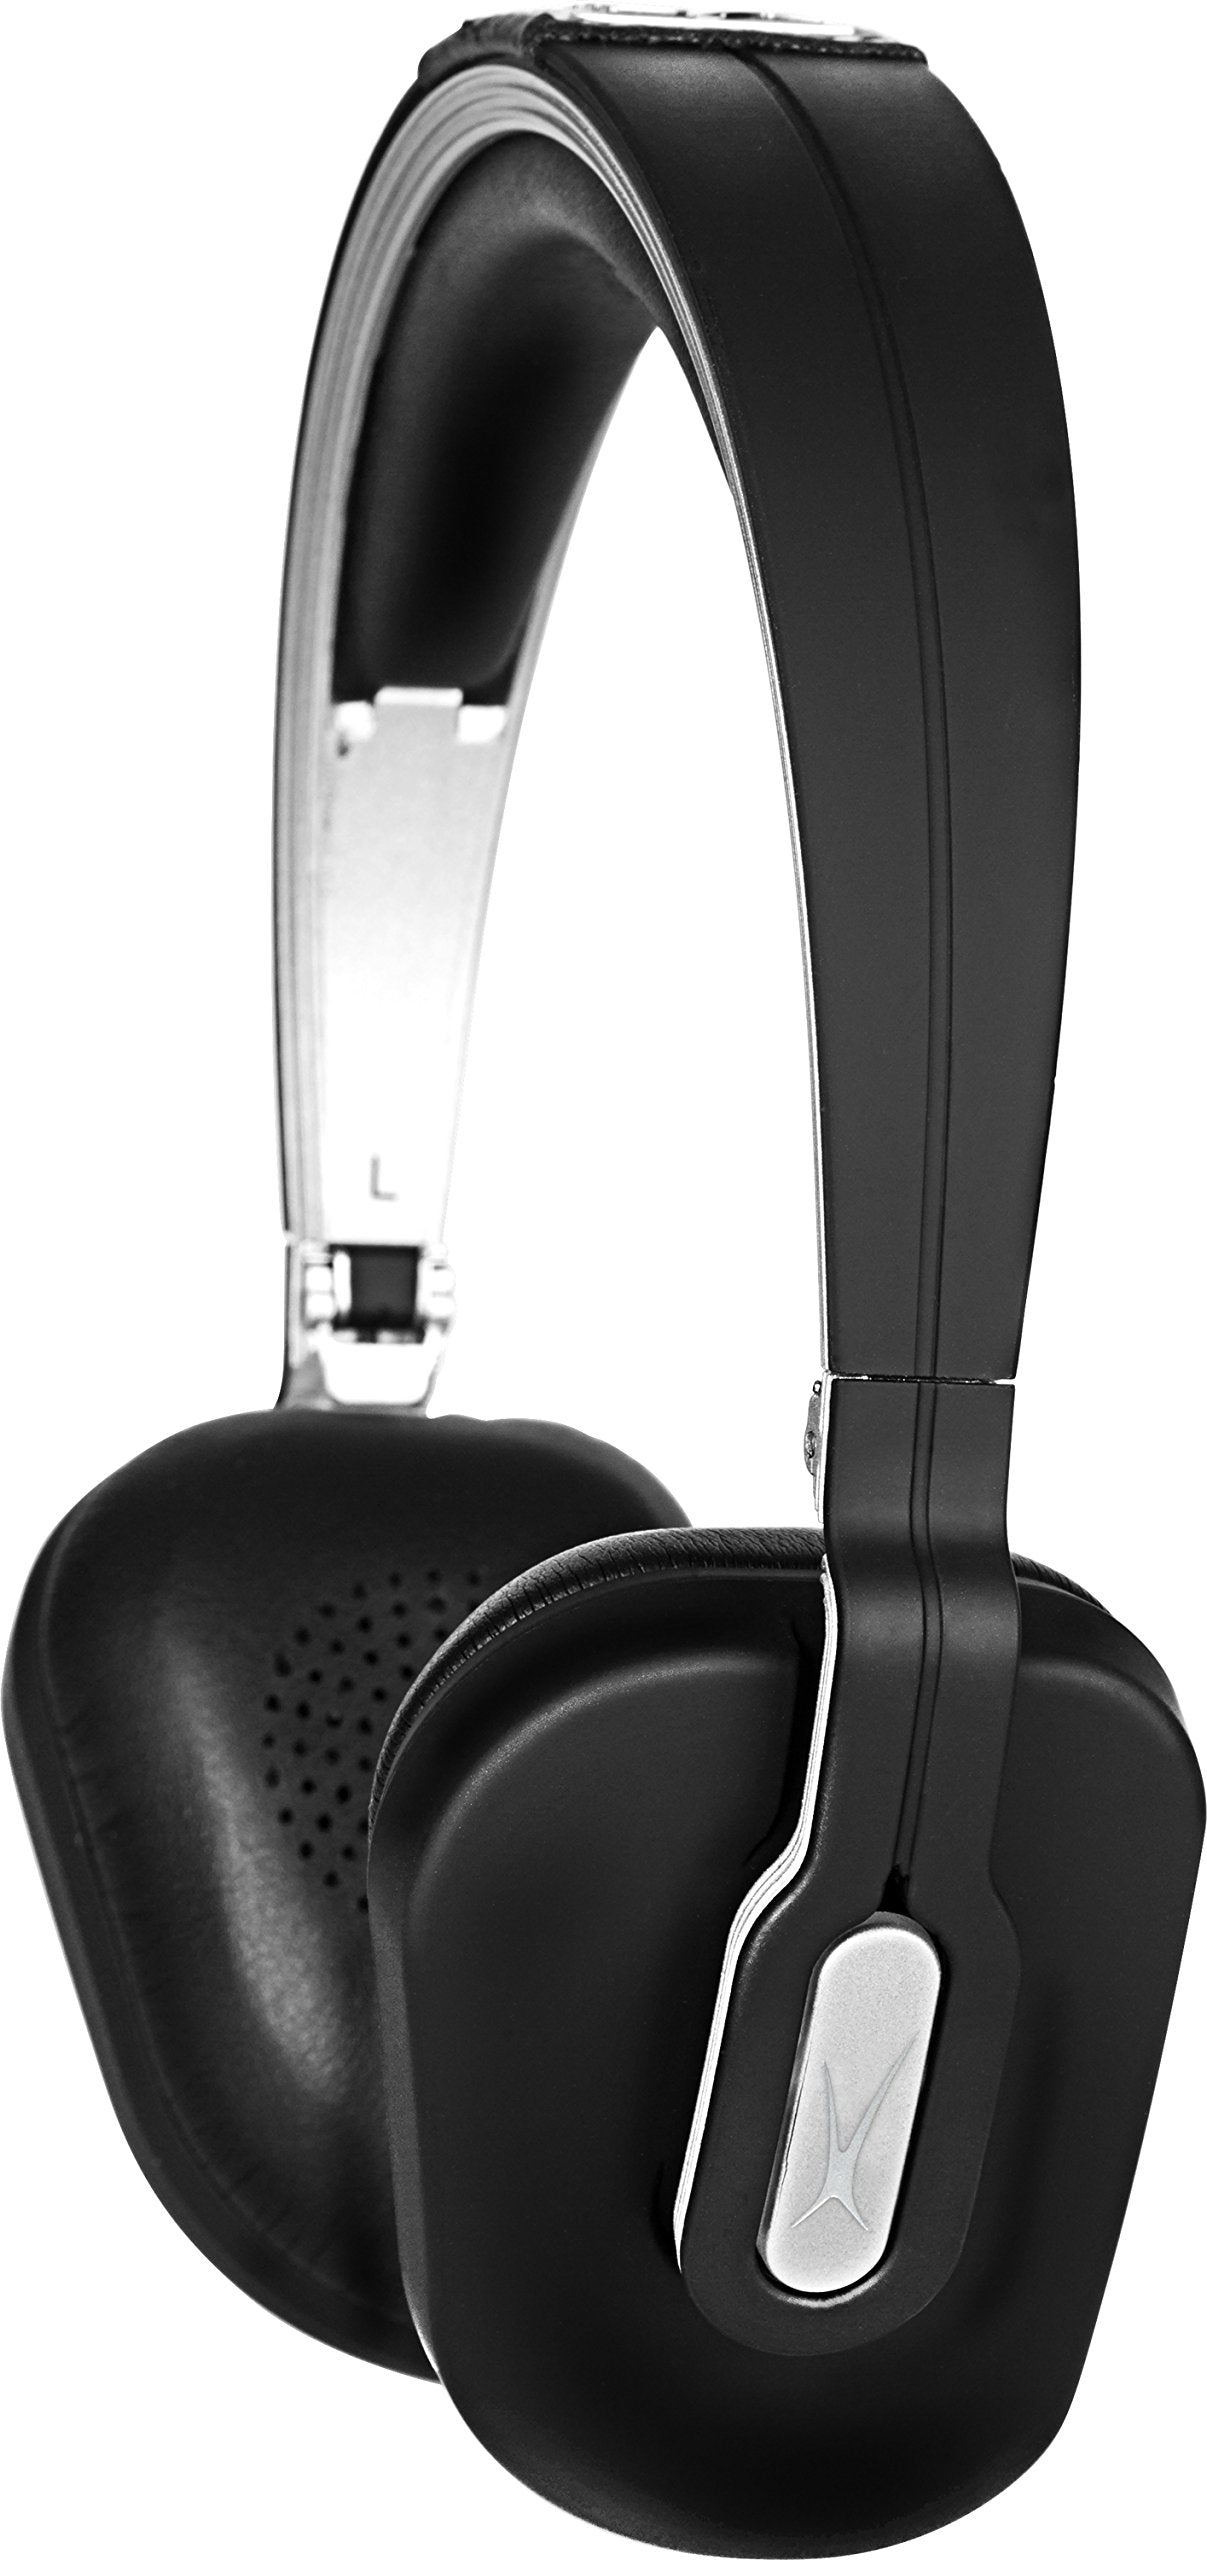 Altec Lansing Over the Head Foldable Headphone with Mic, Black - MZX652